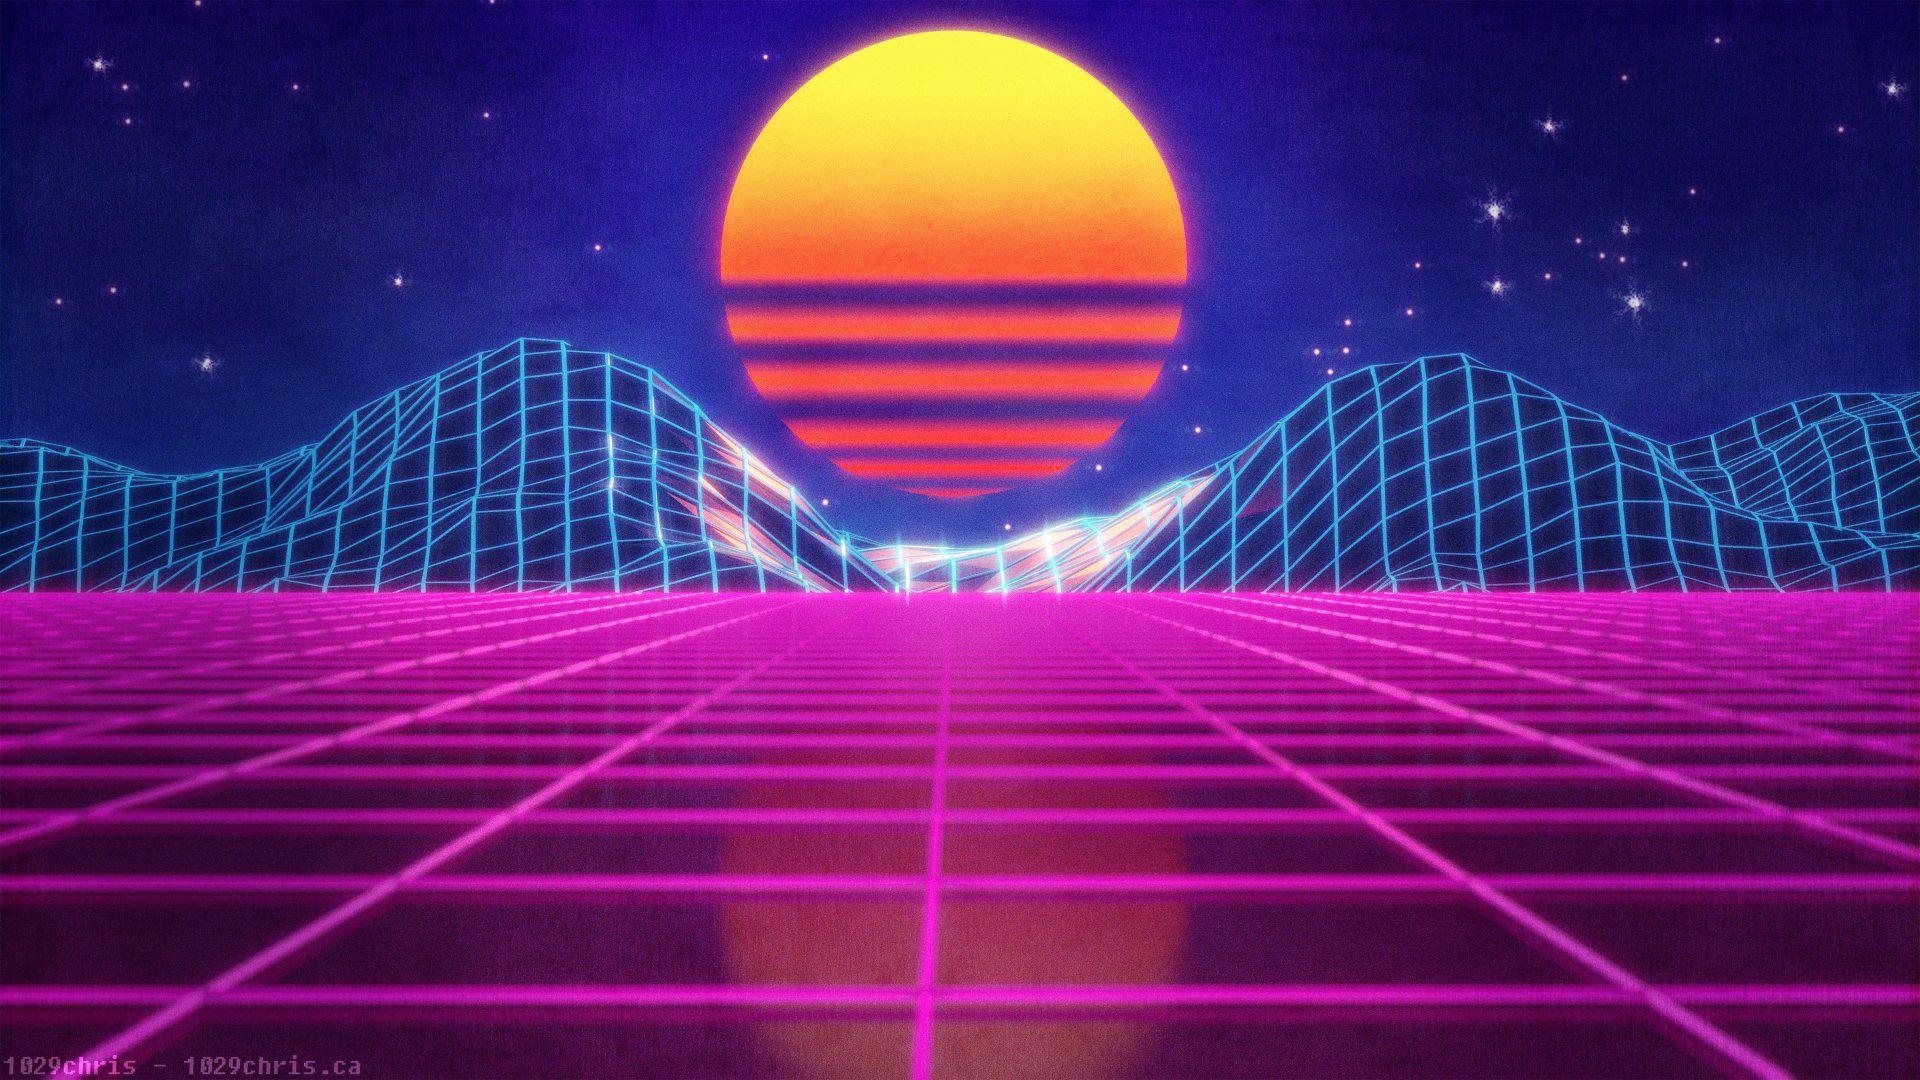 Retro Wave Wallpaper Background Image. View, download, comment, and rate Aby. Background image wallpaper, Neon wallpaper, Retro background